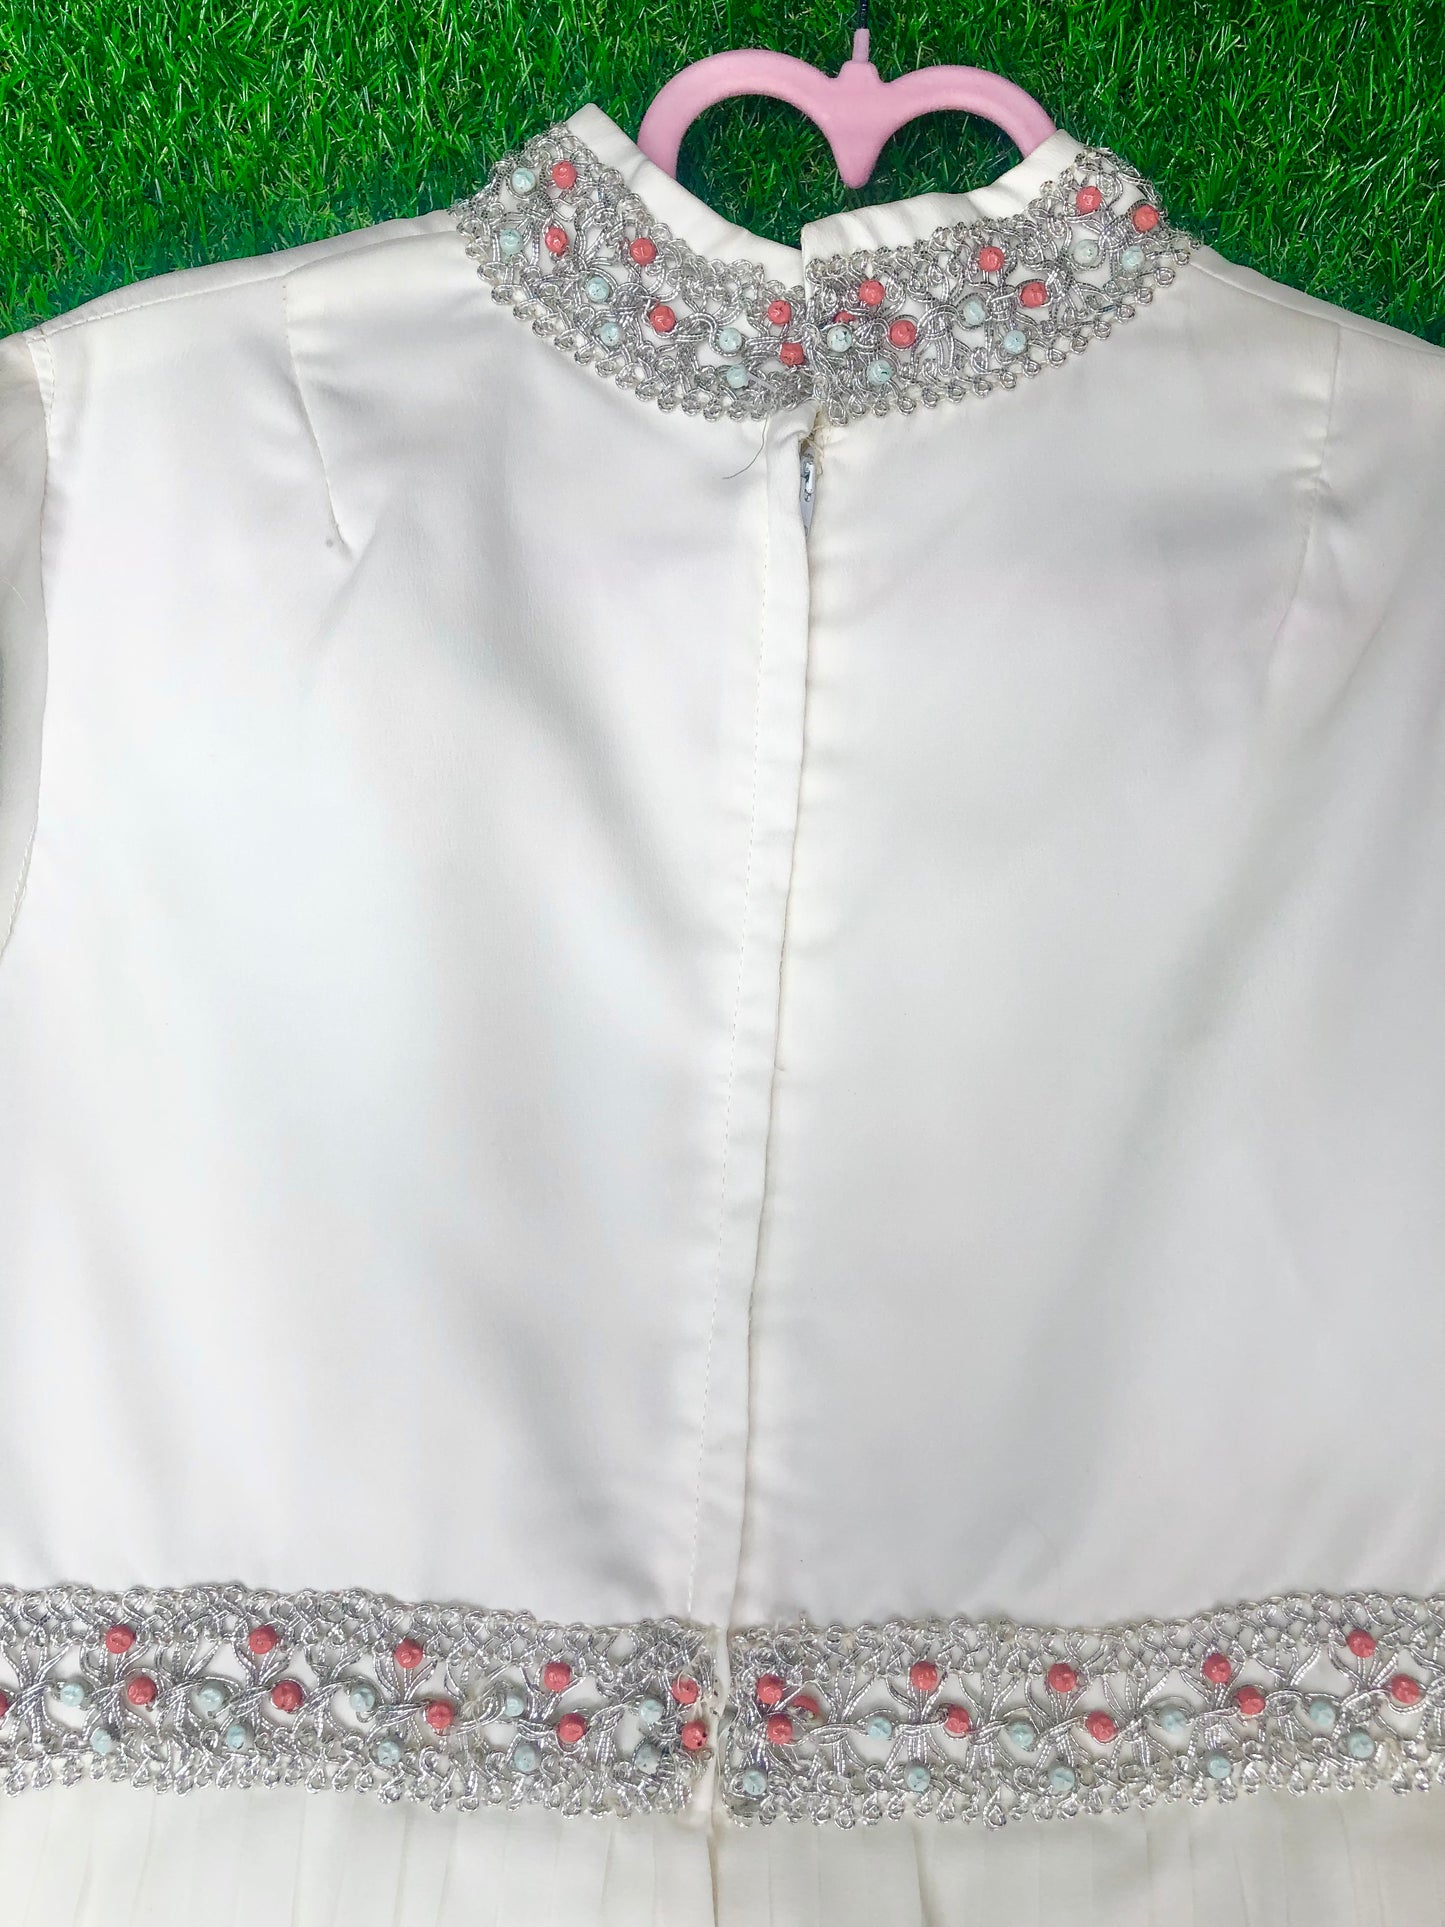 1970's Formal White Beaded Dress With Silver Accents